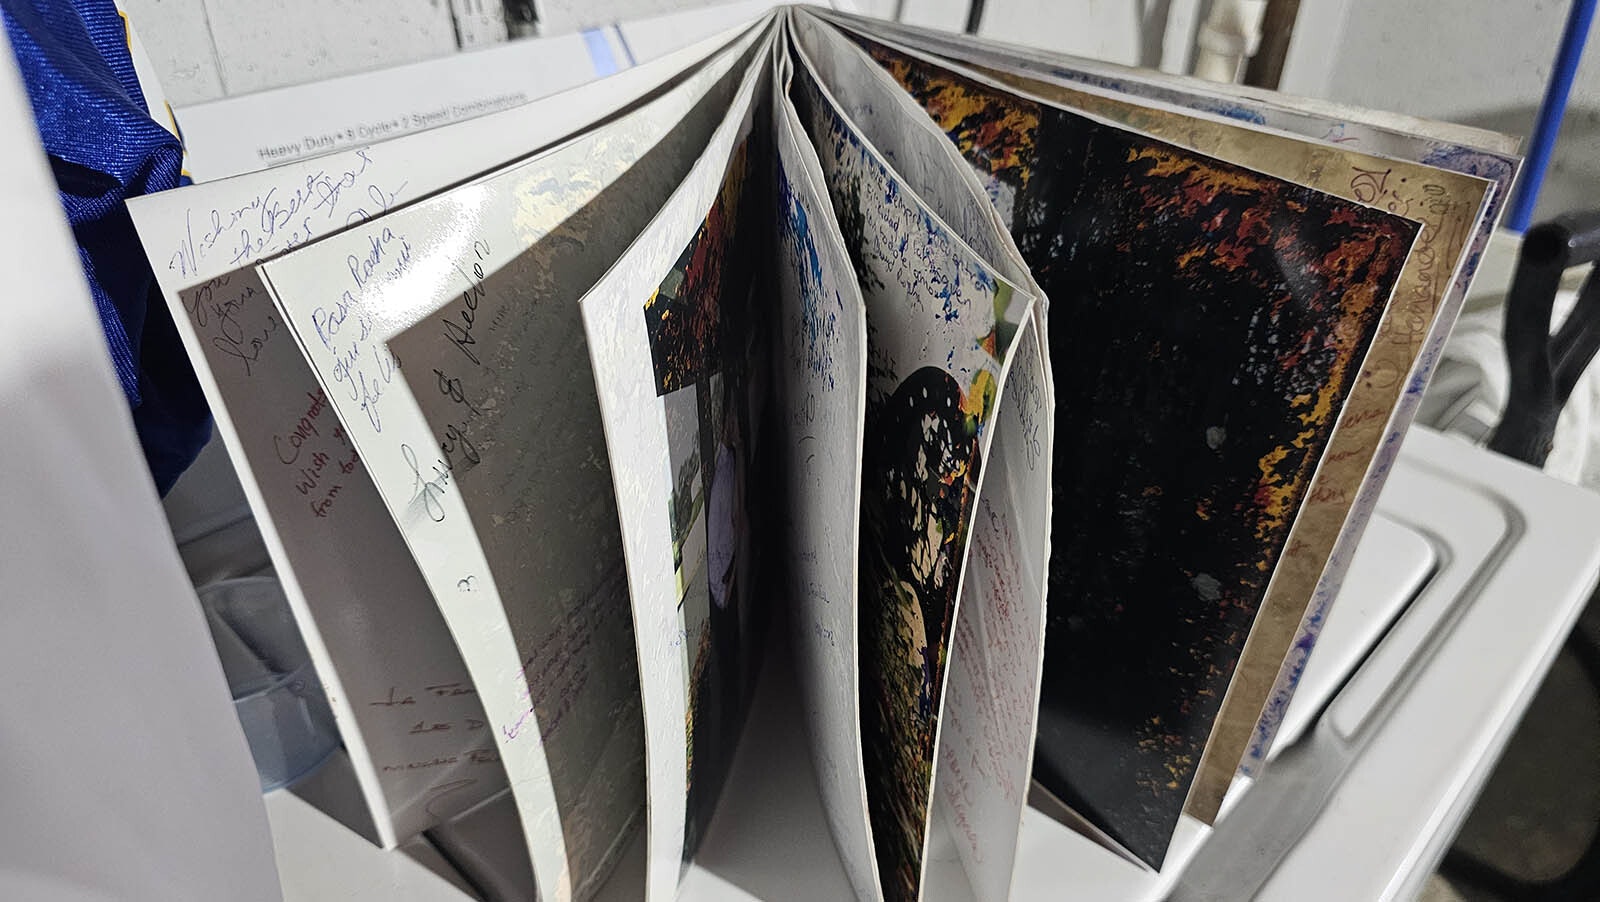 Among the many items in the Rocha-Hernandez household was this wedding album. Many of the pages are sticking together in the aftermath of a flood that filled the couple's basement with 3 feet of water.